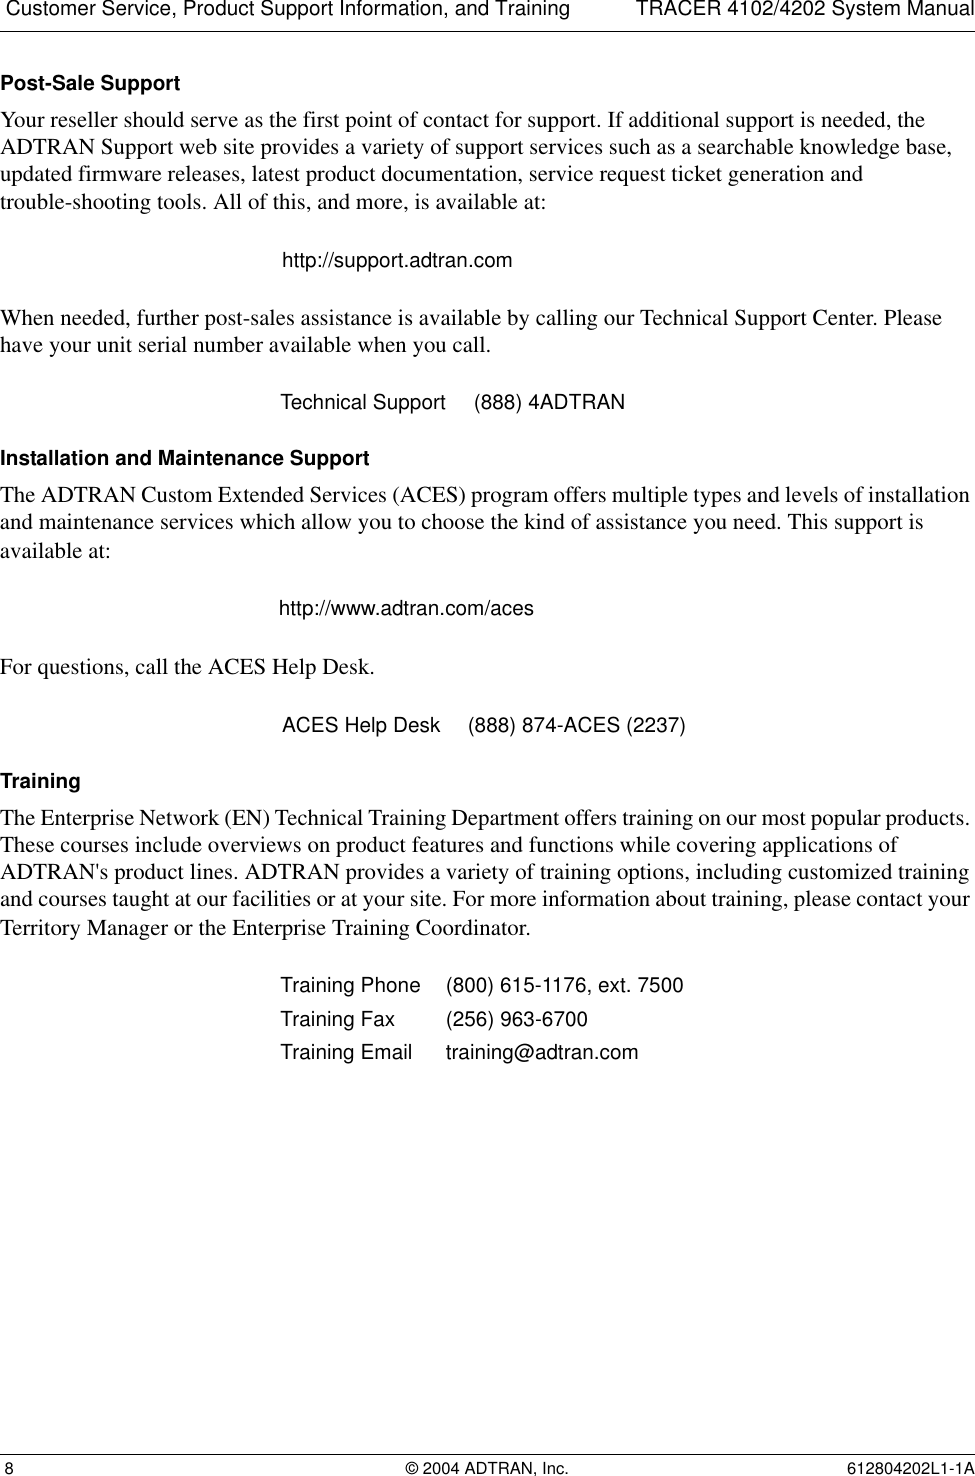  Customer Service, Product Support Information, and Training TRACER 4102/4202 System Manual 8 © 2004 ADTRAN, Inc. 612804202L1-1APost-Sale SupportYour reseller should serve as the first point of contact for support. If additional support is needed, the ADTRAN Support web site provides a variety of support services such as a searchable knowledge base, updated firmware releases, latest product documentation, service request ticket generation and trouble-shooting tools. All of this, and more, is available at:When needed, further post-sales assistance is available by calling our Technical Support Center. Please have your unit serial number available when you call.Installation and Maintenance SupportThe ADTRAN Custom Extended Services (ACES) program offers multiple types and levels of installation and maintenance services which allow you to choose the kind of assistance you need. This support is available at:For questions, call the ACES Help Desk. TrainingThe Enterprise Network (EN) Technical Training Department offers training on our most popular products. These courses include overviews on product features and functions while covering applications of ADTRAN&apos;s product lines. ADTRAN provides a variety of training options, including customized training and courses taught at our facilities or at your site. For more information about training, please contact your Territory Manager or the Enterprise Training Coordinator.http://support.adtran.comTechnical Support (888) 4ADTRANhttp://www.adtran.com/acesACES Help Desk (888) 874-ACES (2237) Training Phone (800) 615-1176, ext. 7500 Training Fax (256) 963-6700Training Email training@adtran.com